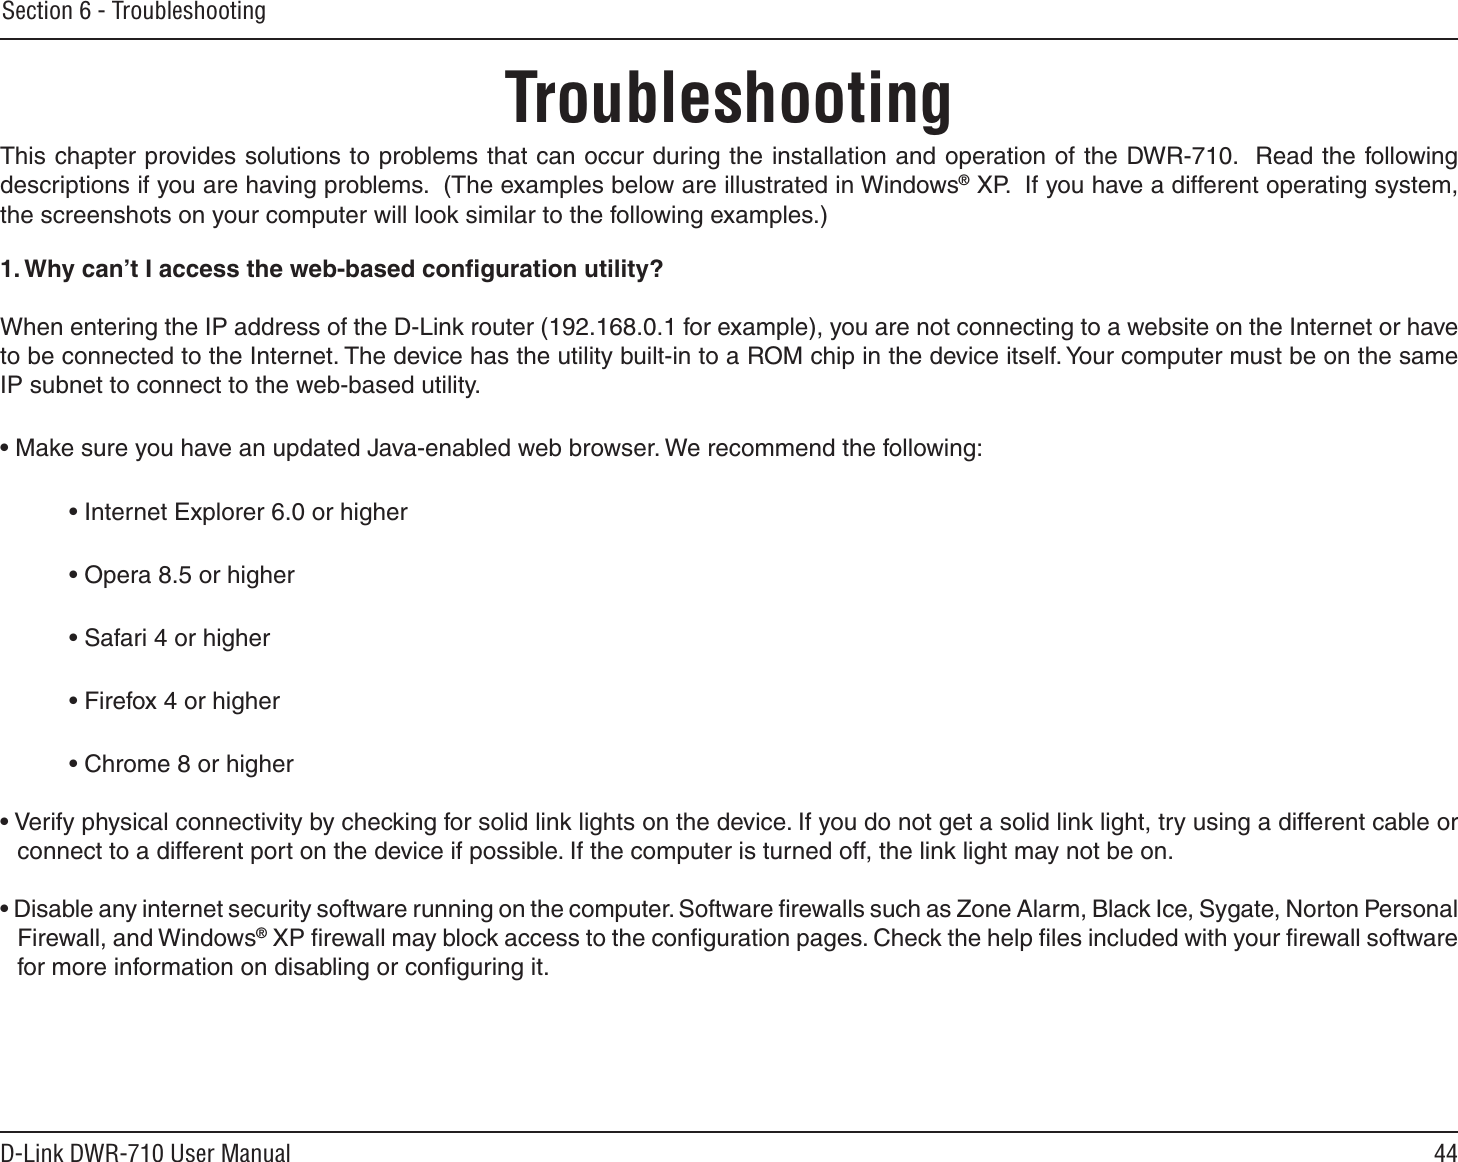 44D-Link DWR-710 User ManualSection 6 - TroubleshootingTroubleshootingThis chapter provides solutions to problems that can occur during the installation and operation of the DWR-710.  Read the following descriptions if you are having problems.  (The examples below are illustrated in Windows® XP.  If you have a different operating system, the screenshots on your computer will look similar to the following examples.)1. Why can’t I access the web-based conﬁguration utility?When entering the IP address of the D-Link router (192.168.0.1 for example), you are not connecting to a website on the Internet or have to be connected to the Internet. The device has the utility built-in to a ROM chip in the device itself. Your computer must be on the same IP subnet to connect to the web-based utility. • Make sure you have an updated Java-enabled web browser. We recommend the following: • Internet Explorer 6.0 or higher • Opera 8.5 or higher • Safari 4 or higher • Firefox 4 or higher • Chrome 8 or higher• Verify physical connectivity by checking for solid link lights on the device. If you do not get a solid link light, try using a different cable or connect to a different port on the device if possible. If the computer is turned off, the link light may not be on.• Disable any internet security software running on the computer. Software ﬁrewalls such as Zone Alarm, Black Ice, Sygate, Norton Personal Firewall, and Windows® XP ﬁrewall may block access to the conﬁguration pages. Check the help ﬁles included with your ﬁrewall software for more information on disabling or conﬁguring it.